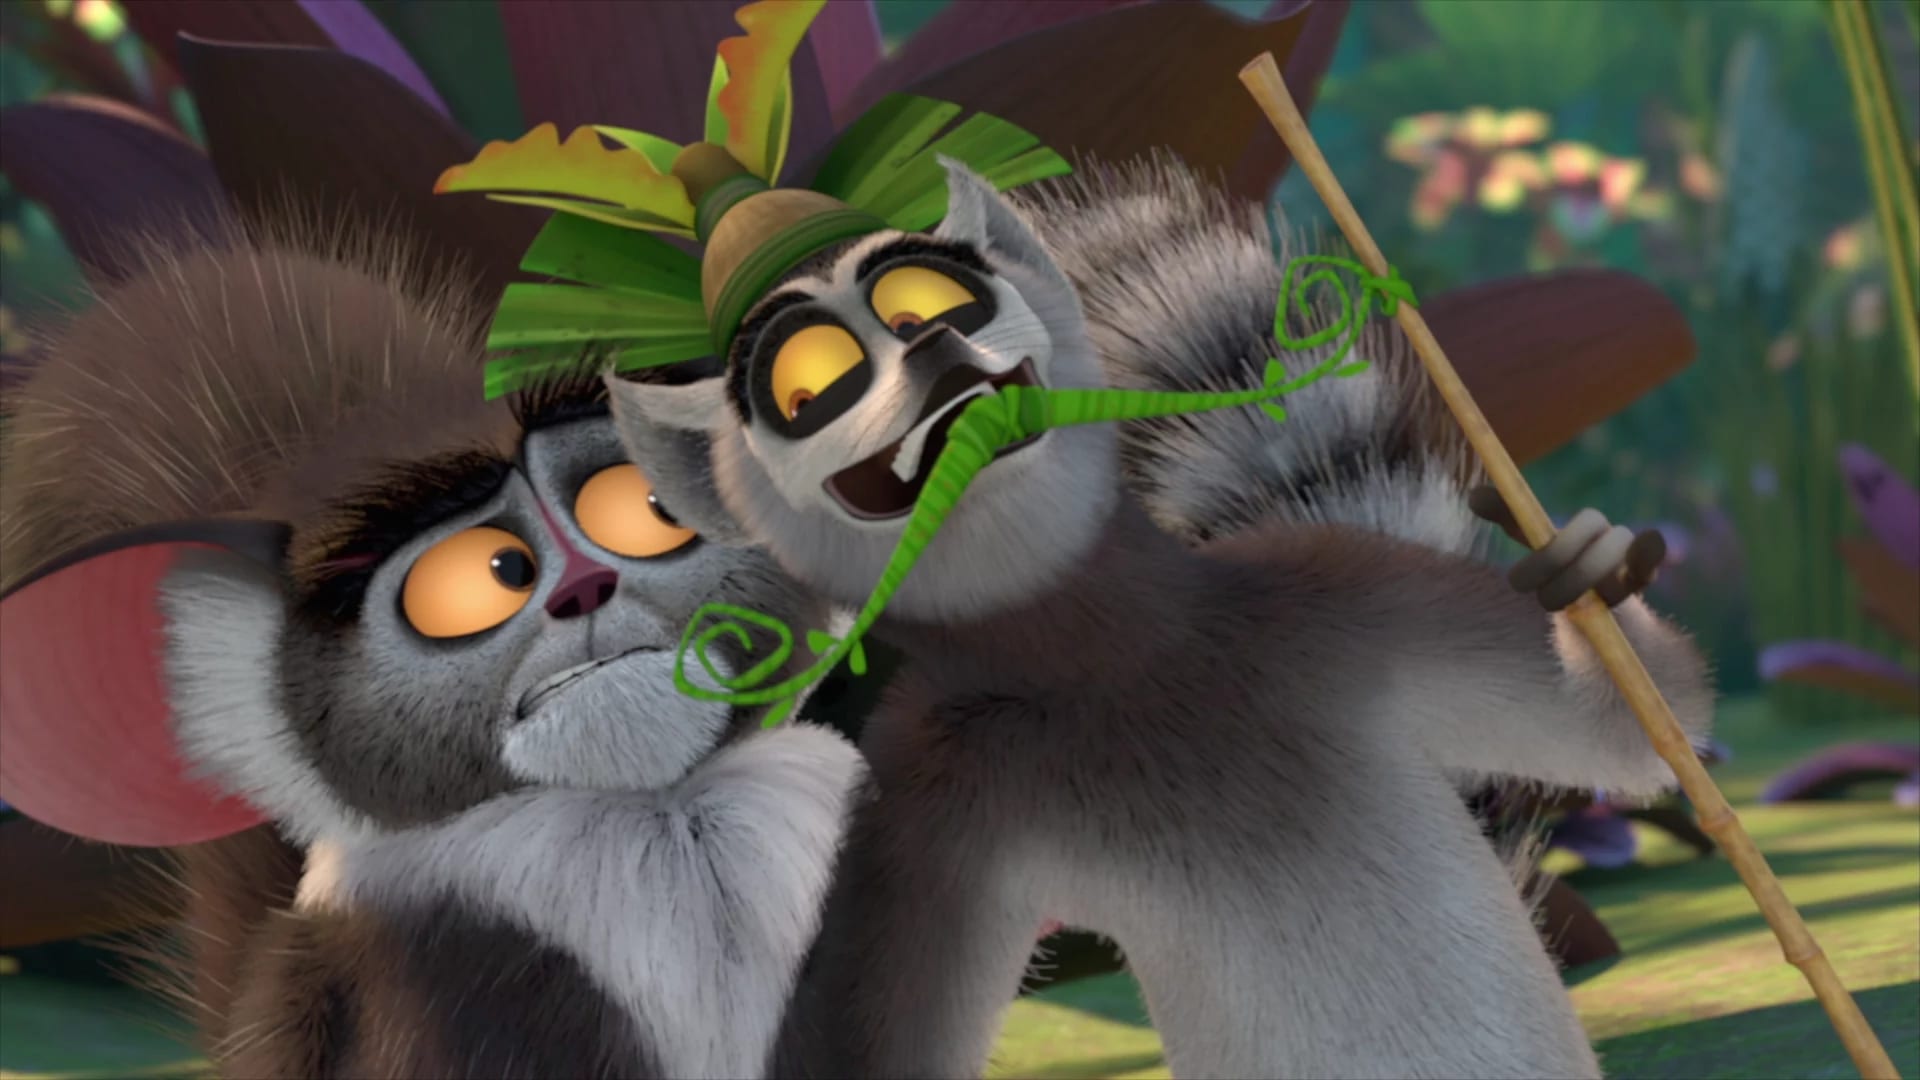 4.5. King Julien learns that 99% of the lemurs love him, so he makes it his...